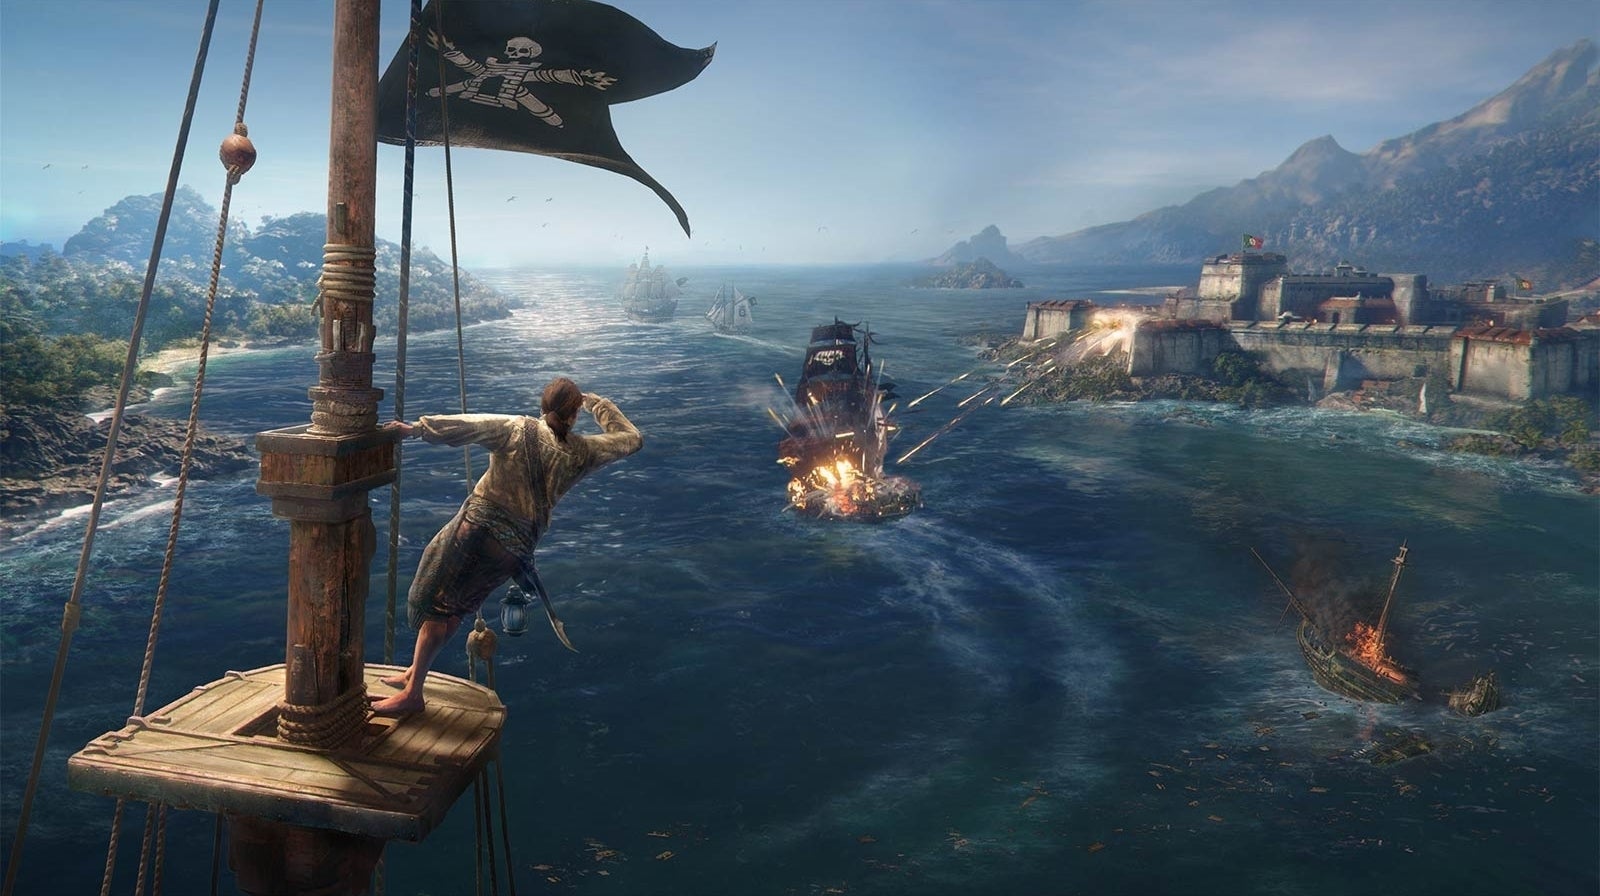 Image for MIA pirate game Skull & Bones has a new vision, Ubisoft says